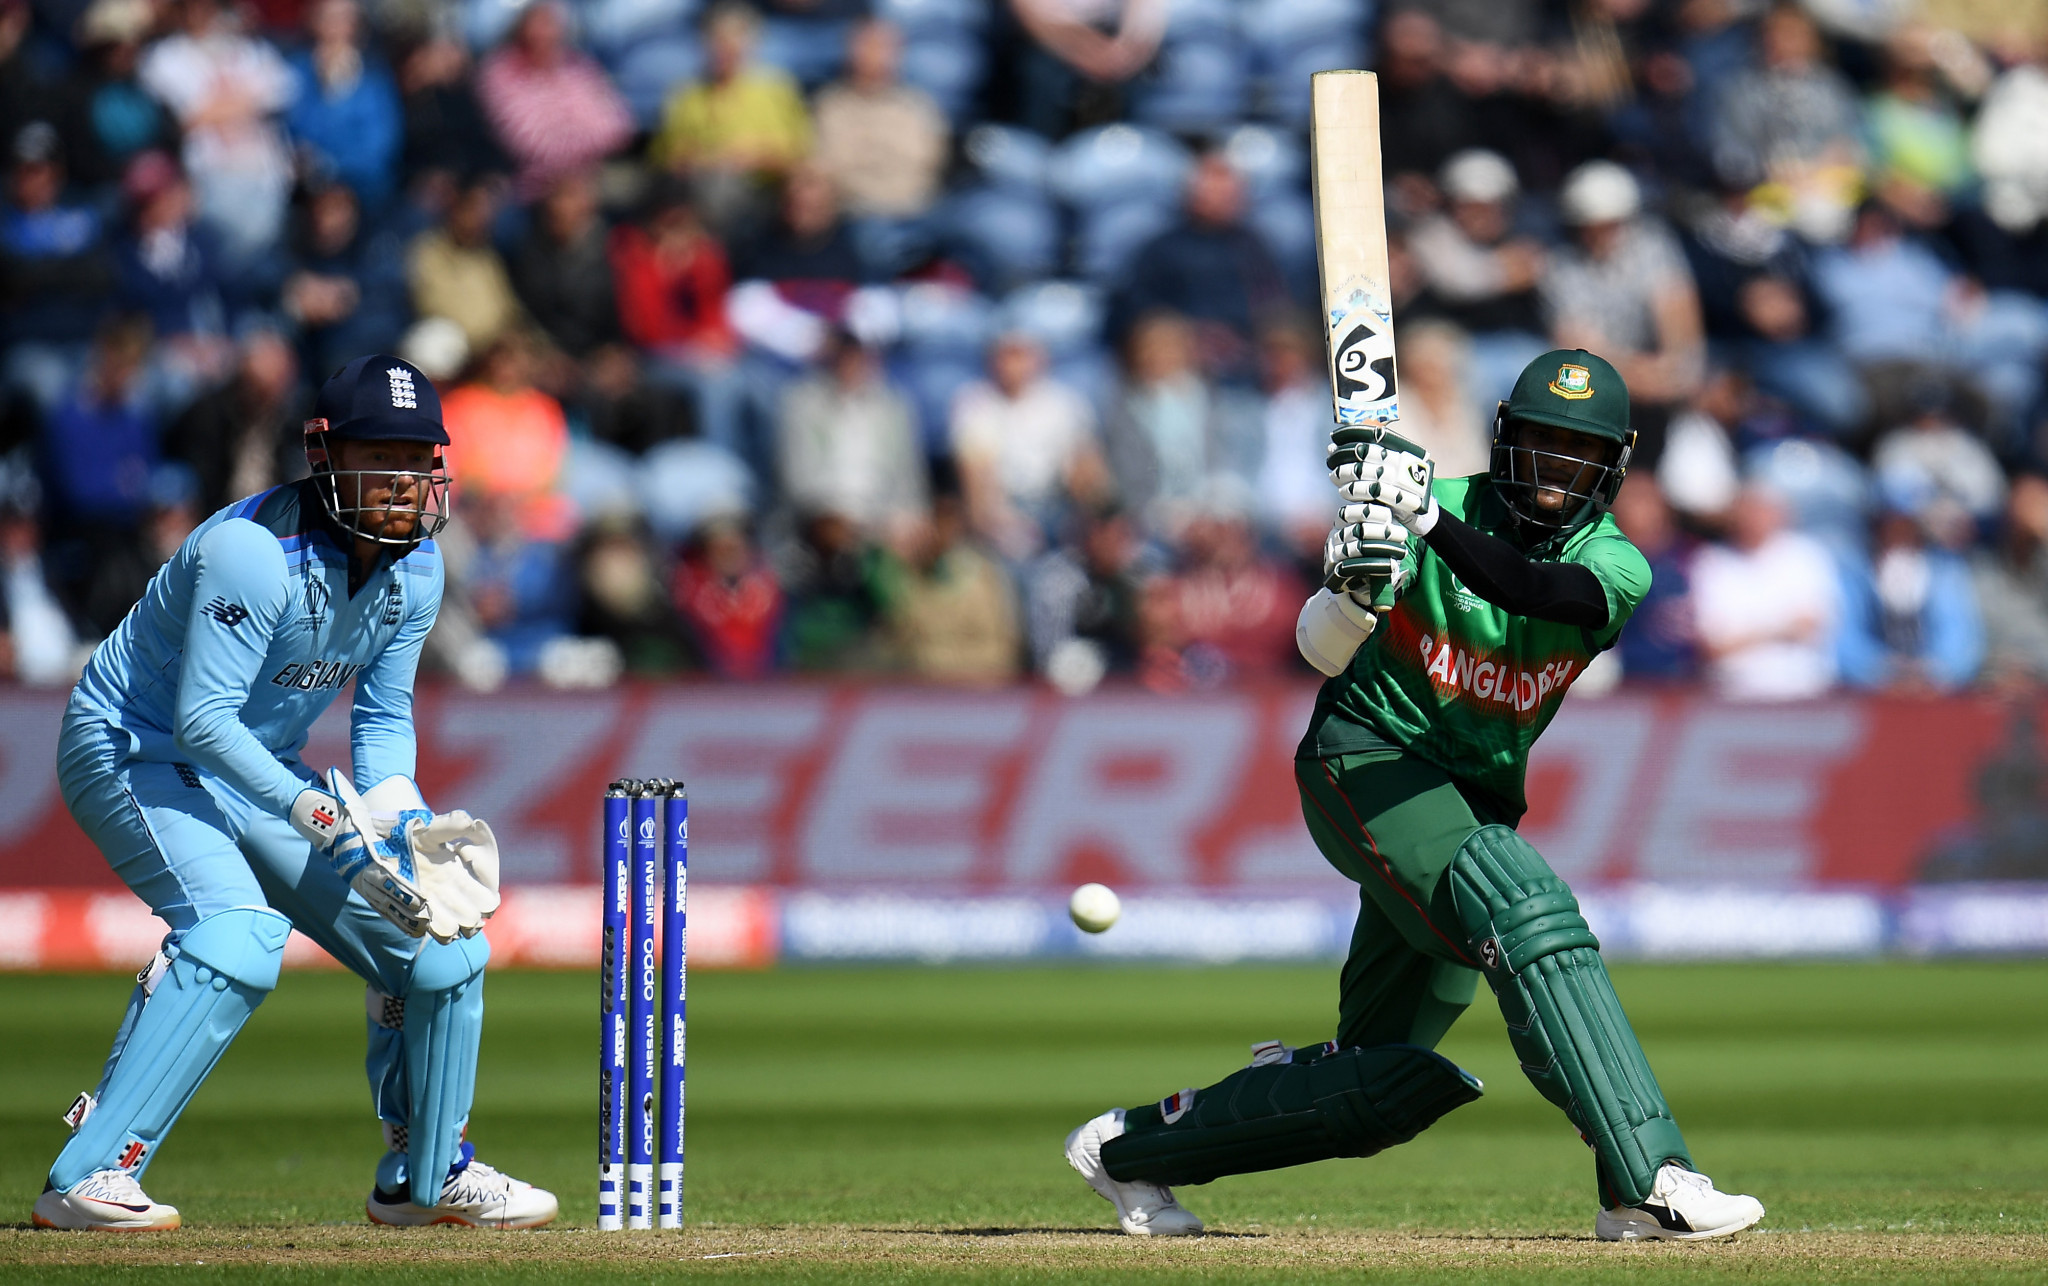 England last played Bangladesh in 2019 at the Cricket World Cup, winning by 106 runs ©Getty Images